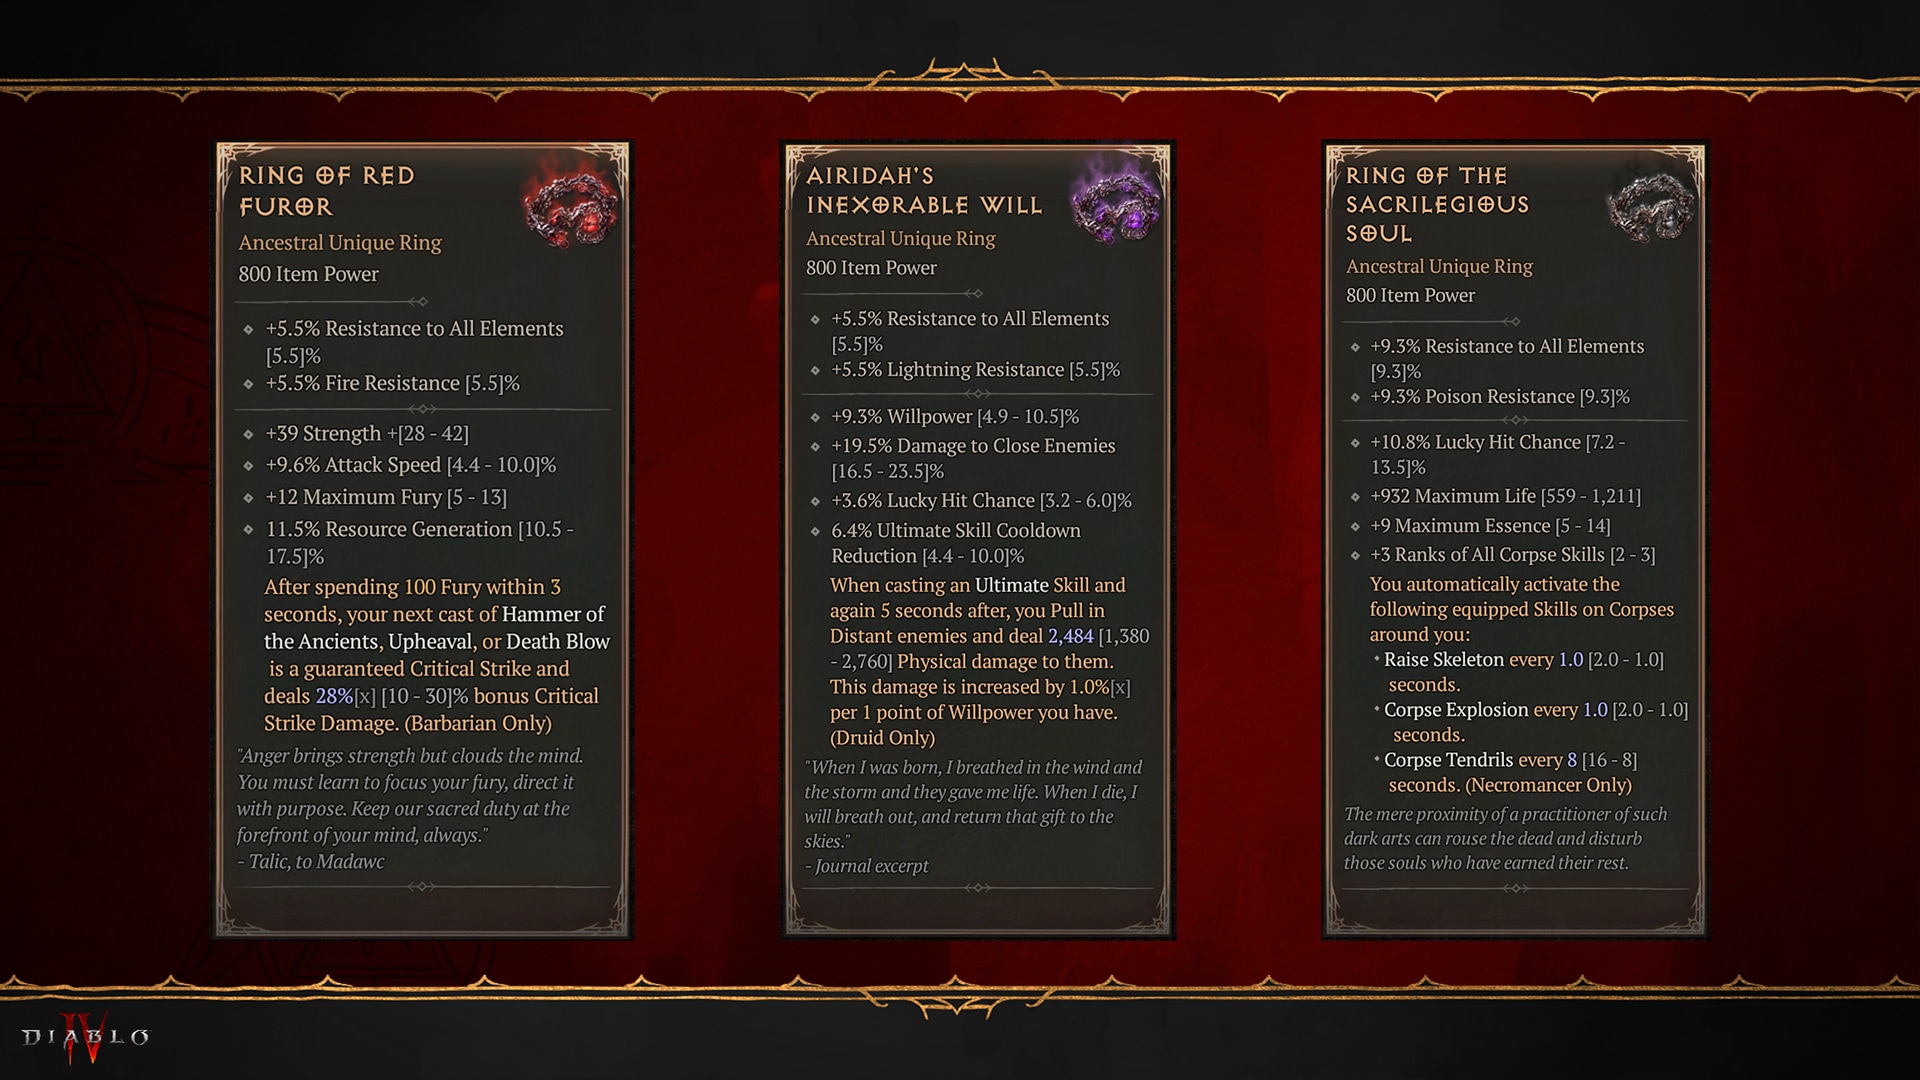 Diablo 3 gets a totally new talent system in Season 28: Rites of Sanctuary